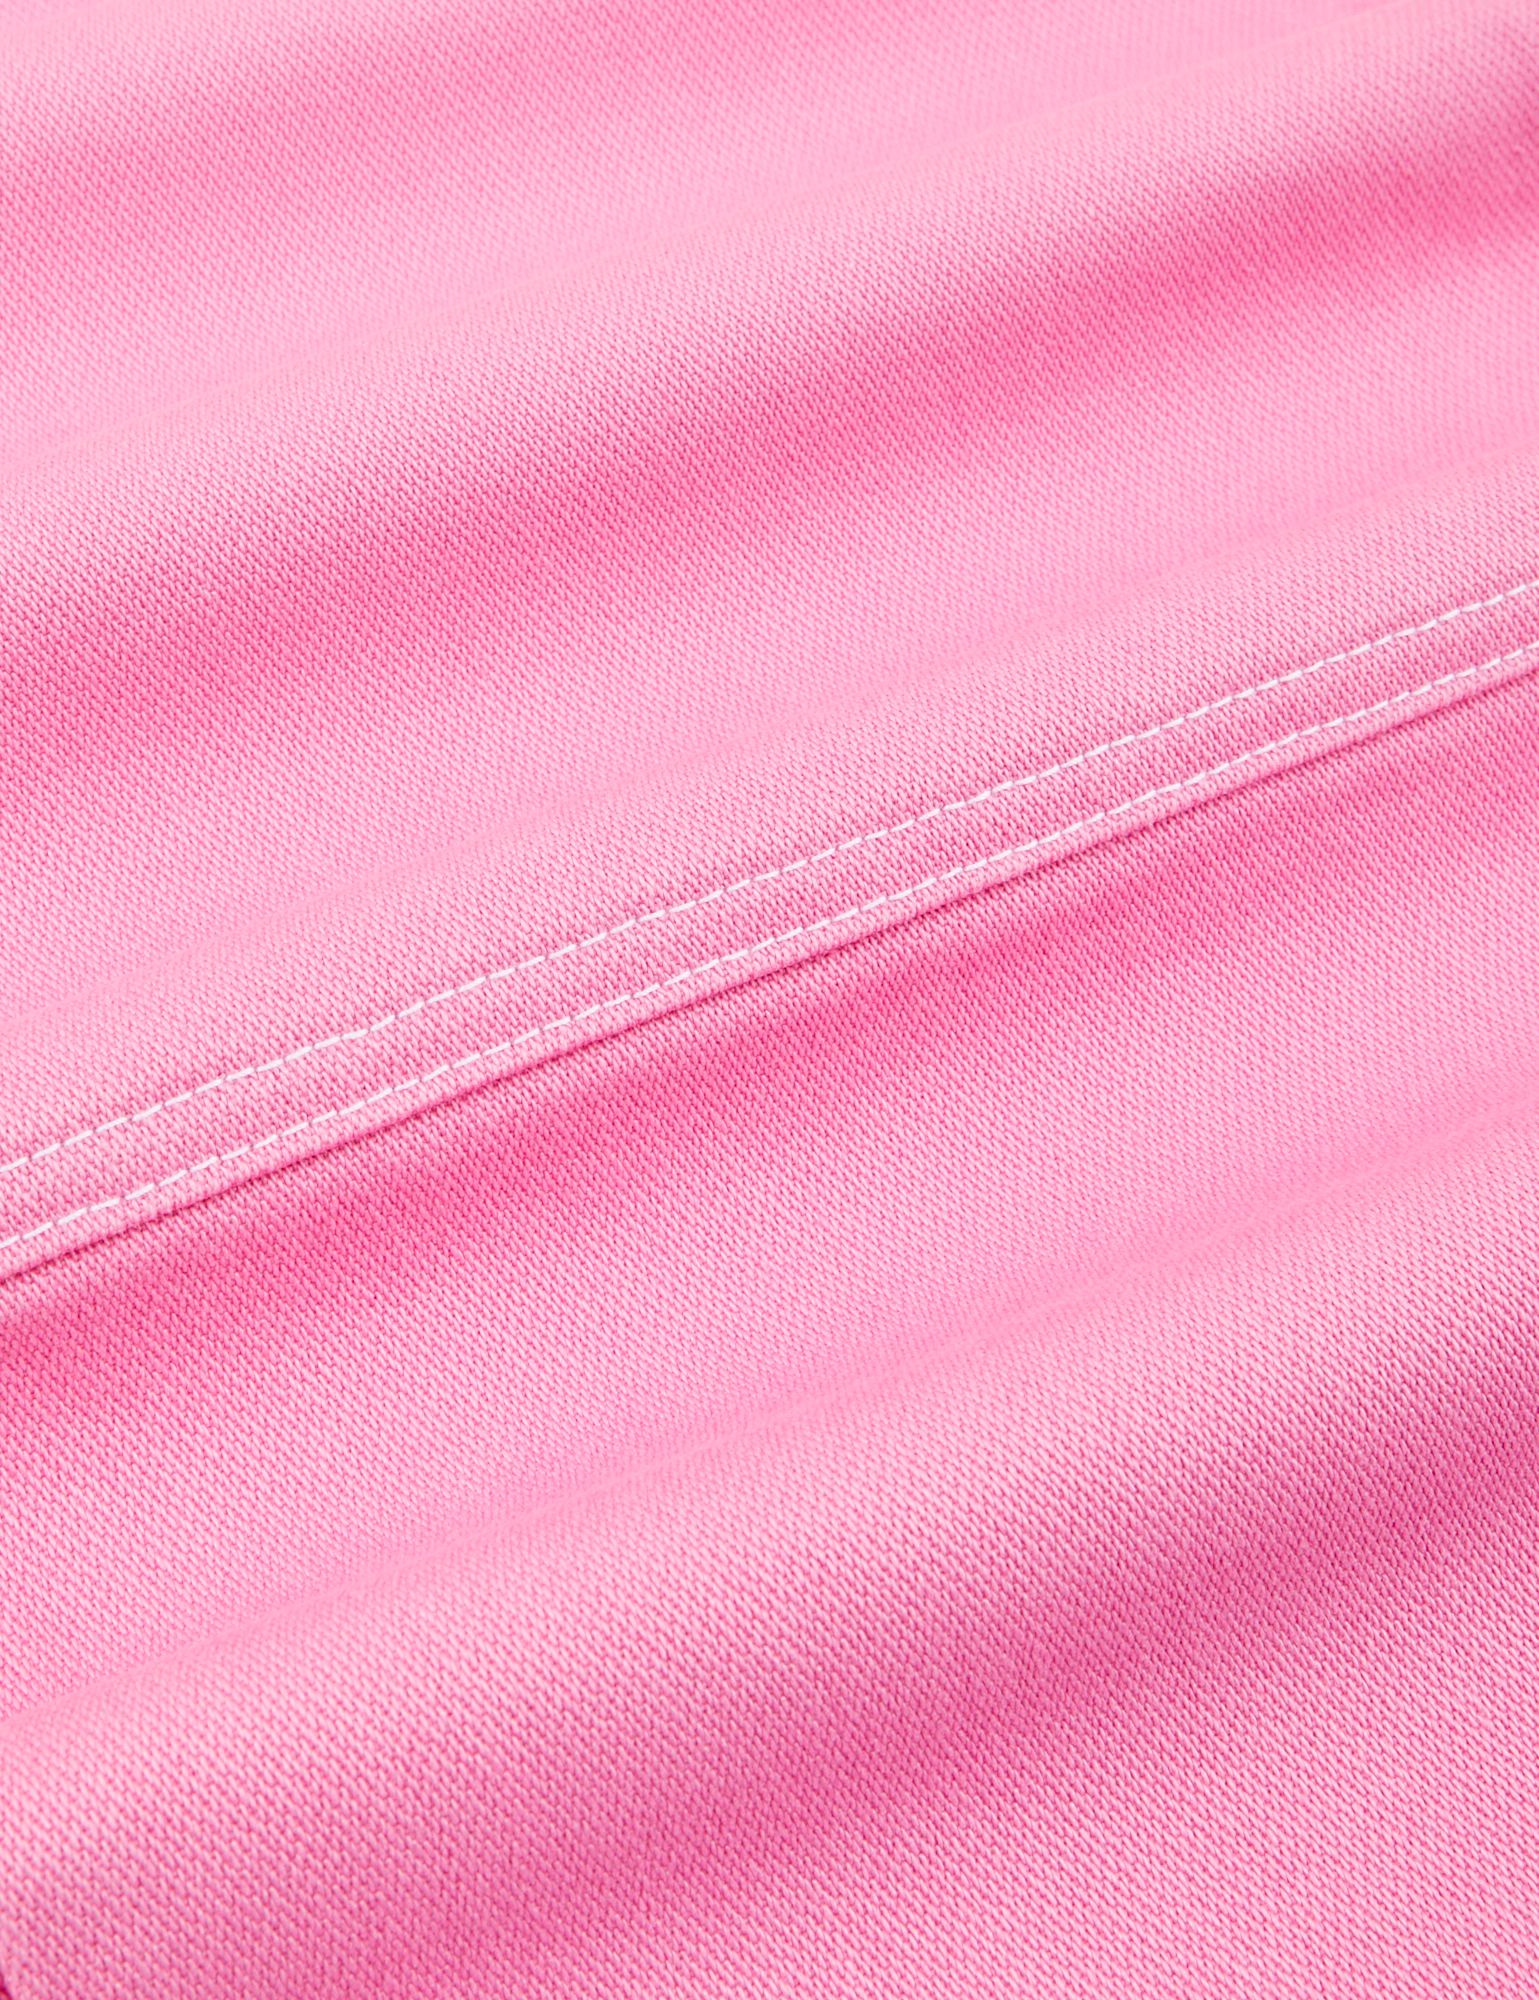 Carpenter Jeans in Bubblegum Pink fabric detail close up with contrast white top stitching.